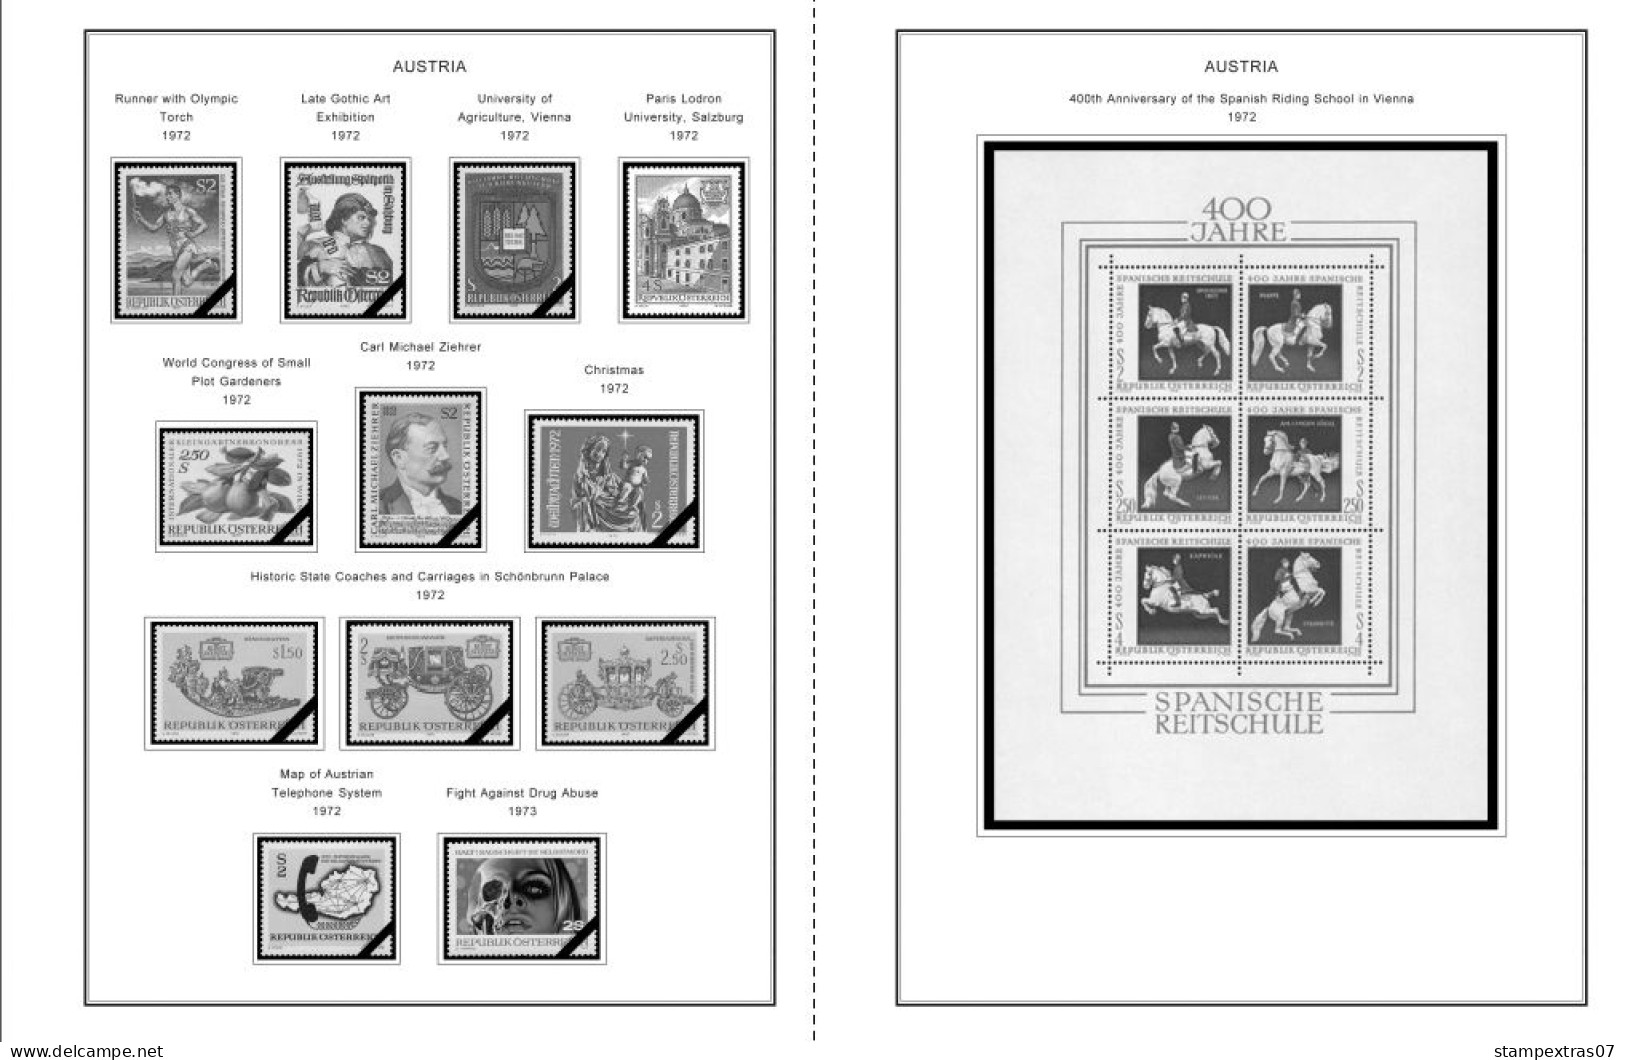 AUSTRIA 1850-2010 + 2011-2020 STAMP ALBUM PAGES (417 b&w illustrated pages)